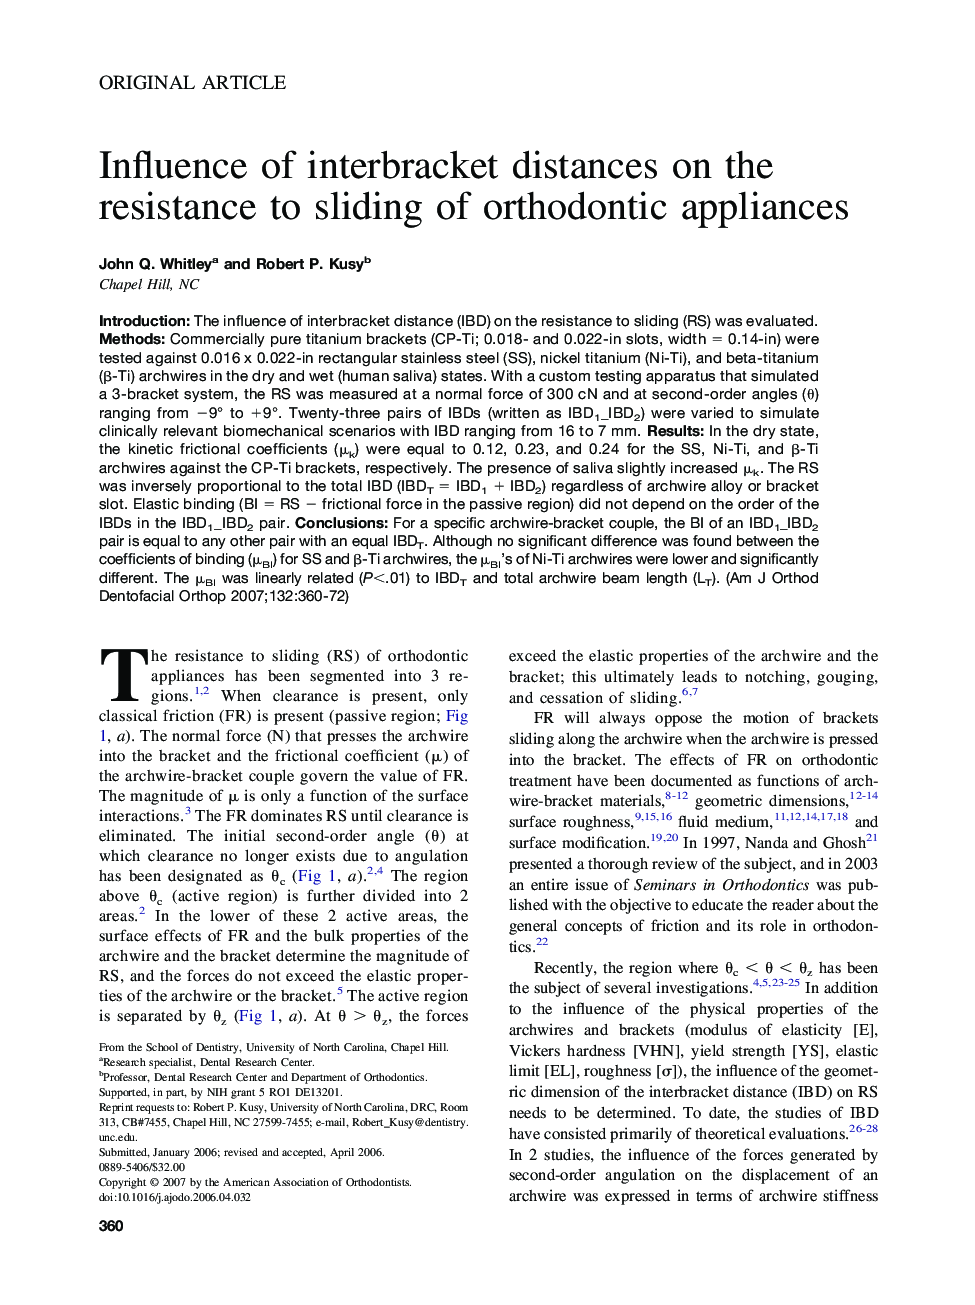 Influence of interbracket distances on the resistance to sliding of orthodontic appliances 